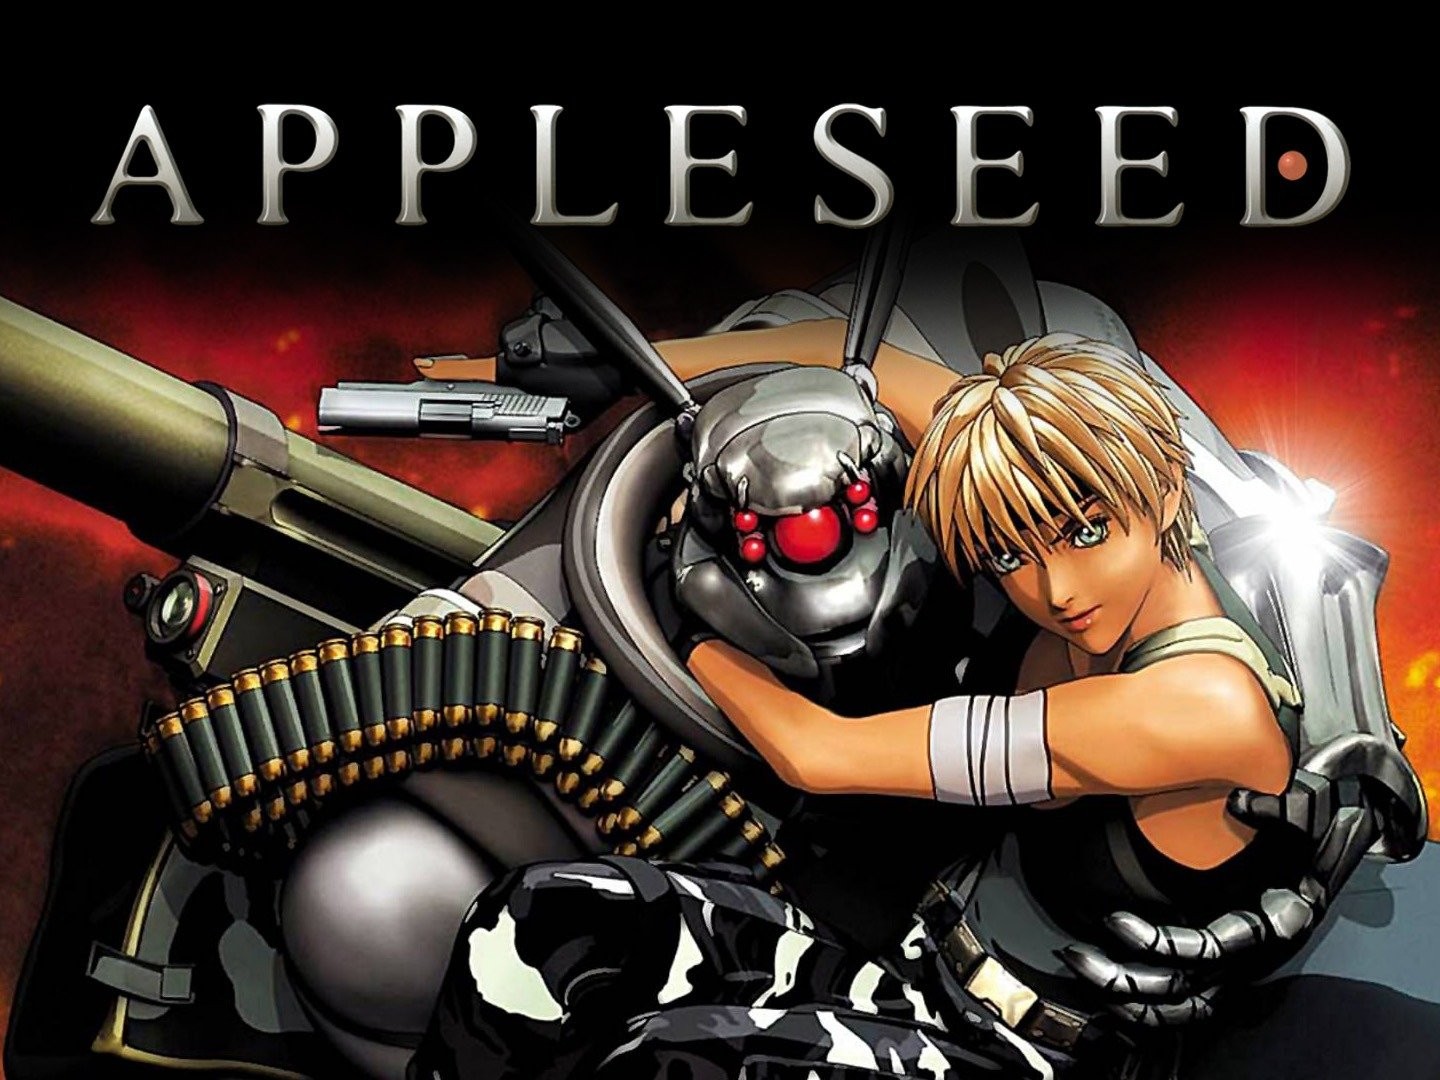 Appleseed 1988 | Prede's Anime Reviews